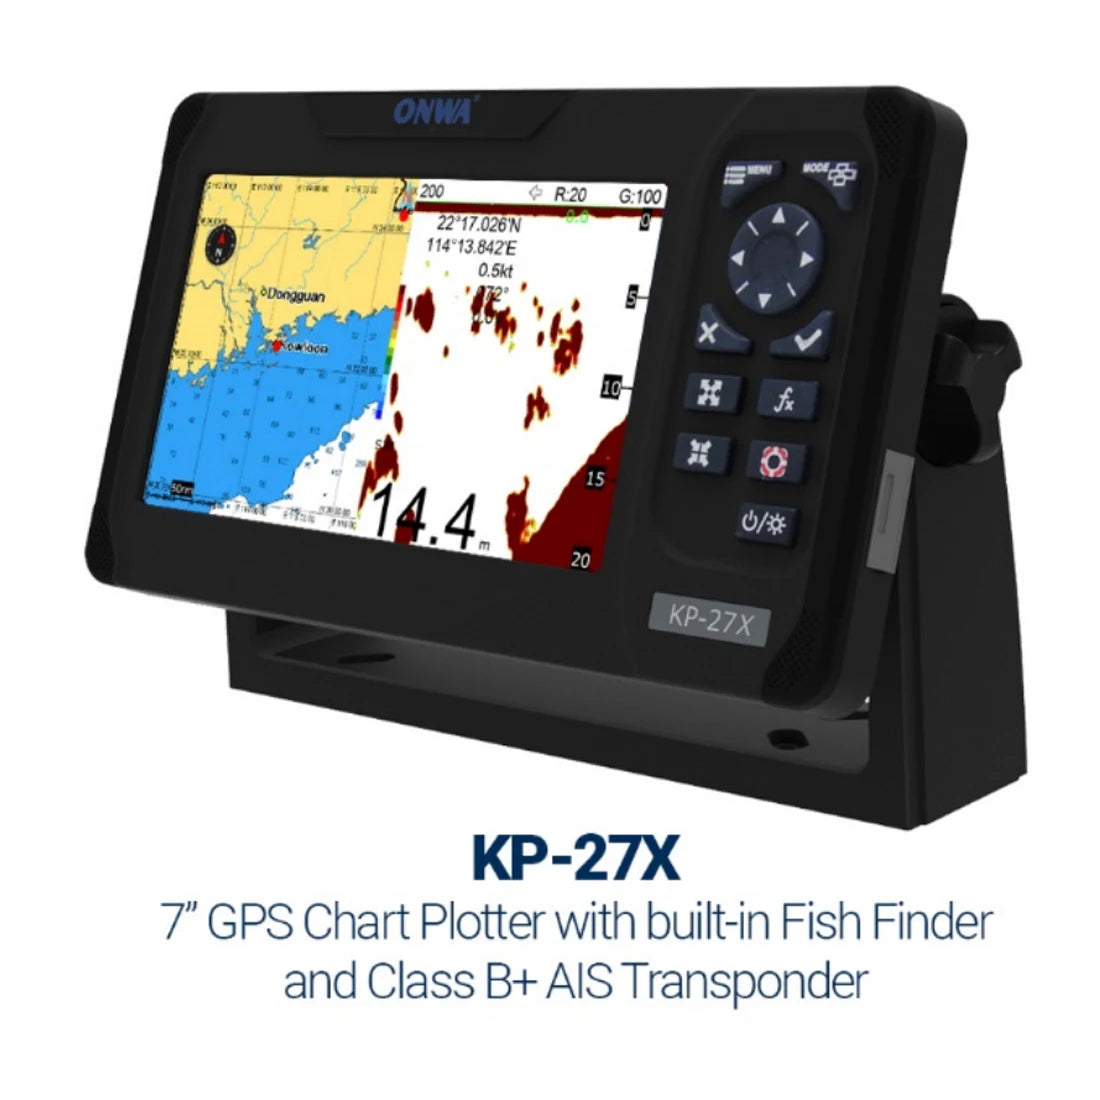 ONWA KP-27X 7-inch IP66 Marine GPS Chart Plotter  4-IN-1 with Echo Sounder with AIS Built-in Fish Finder